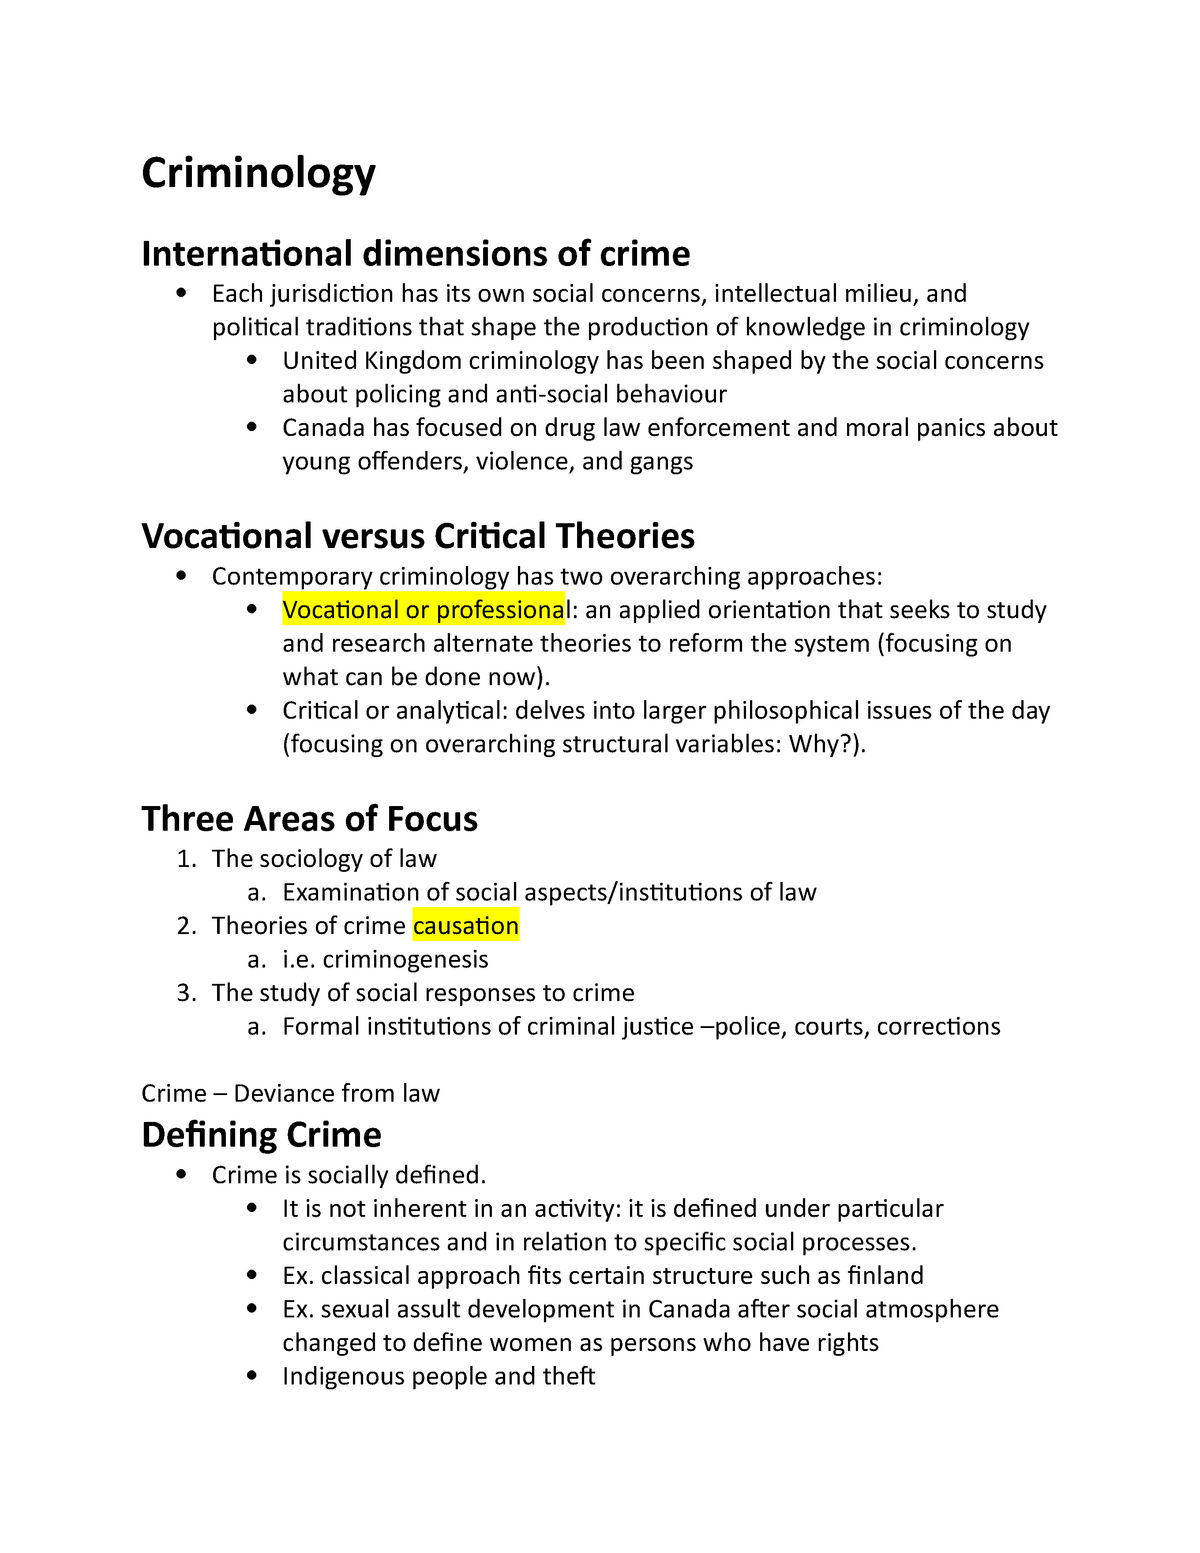 thesis ideas for criminology